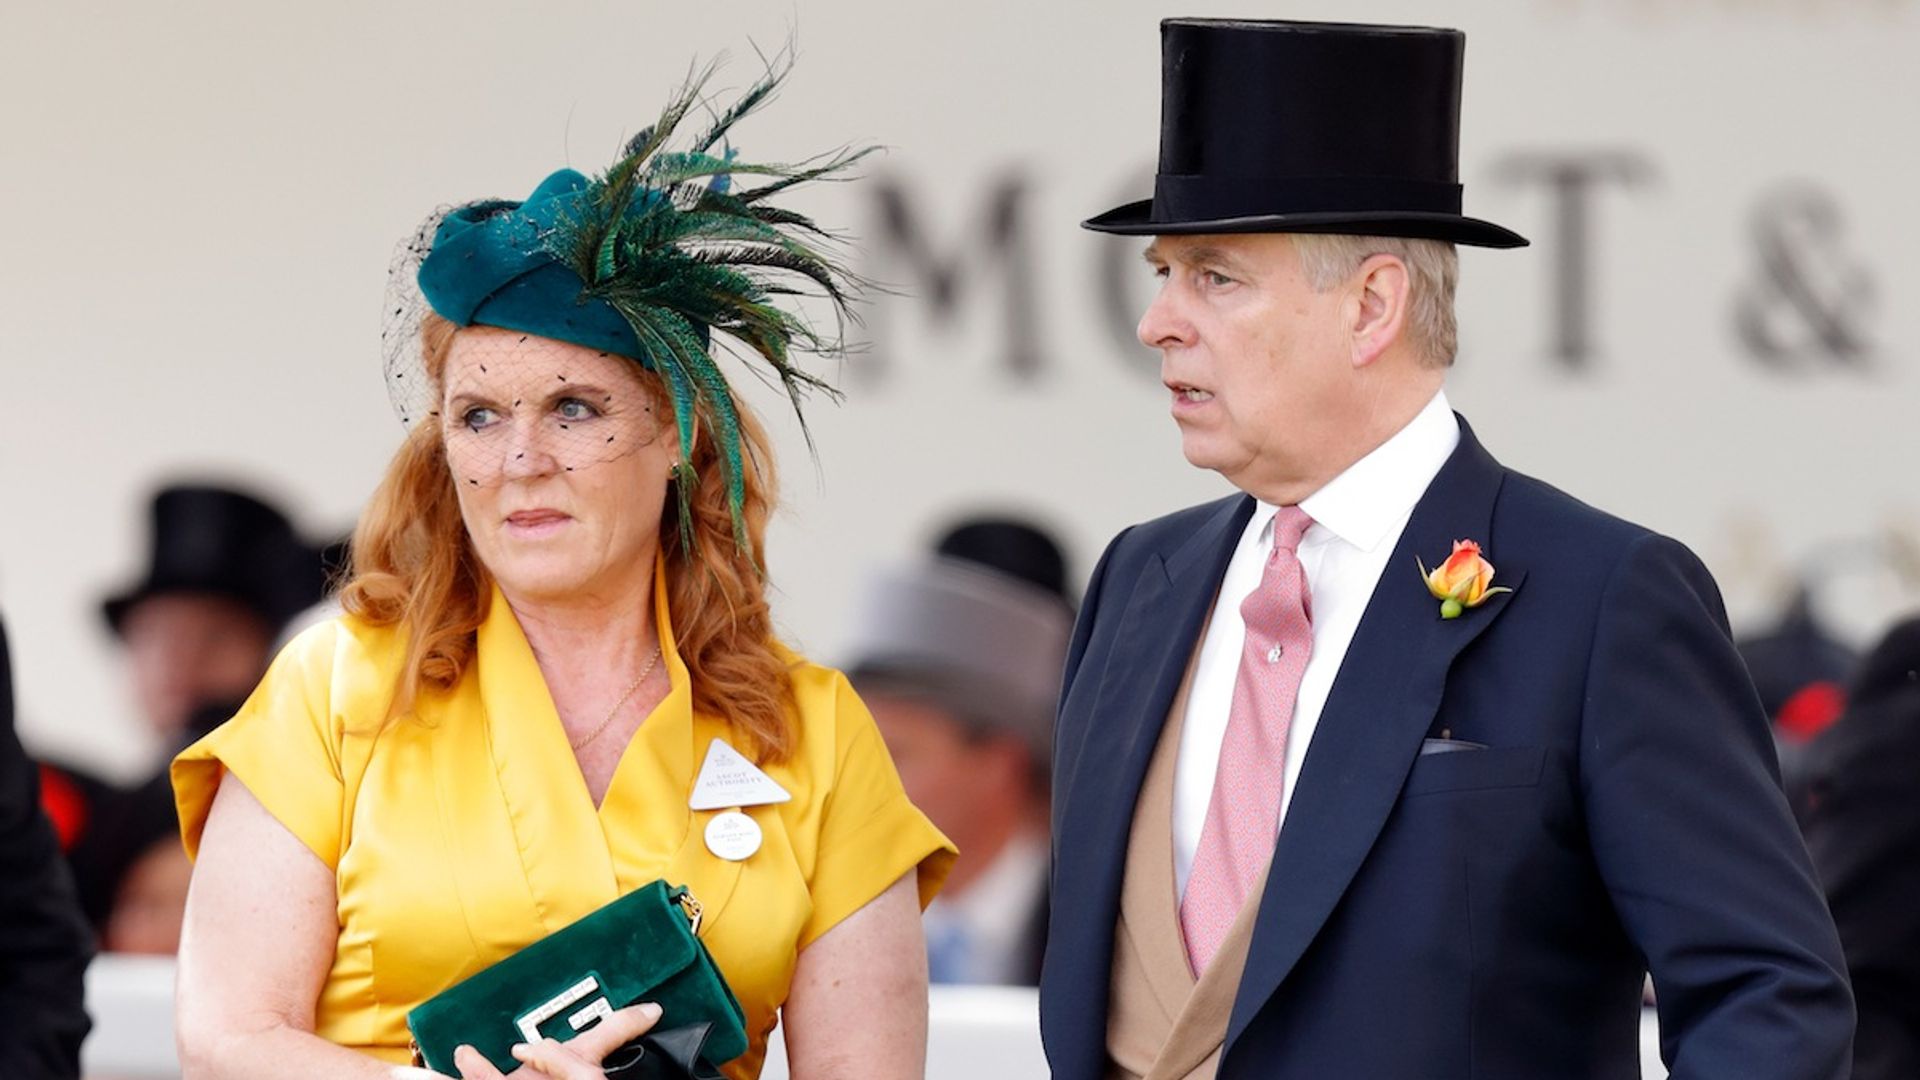 Sarah Ferguson's Royal Ascot outfit featured a very last-minute detail